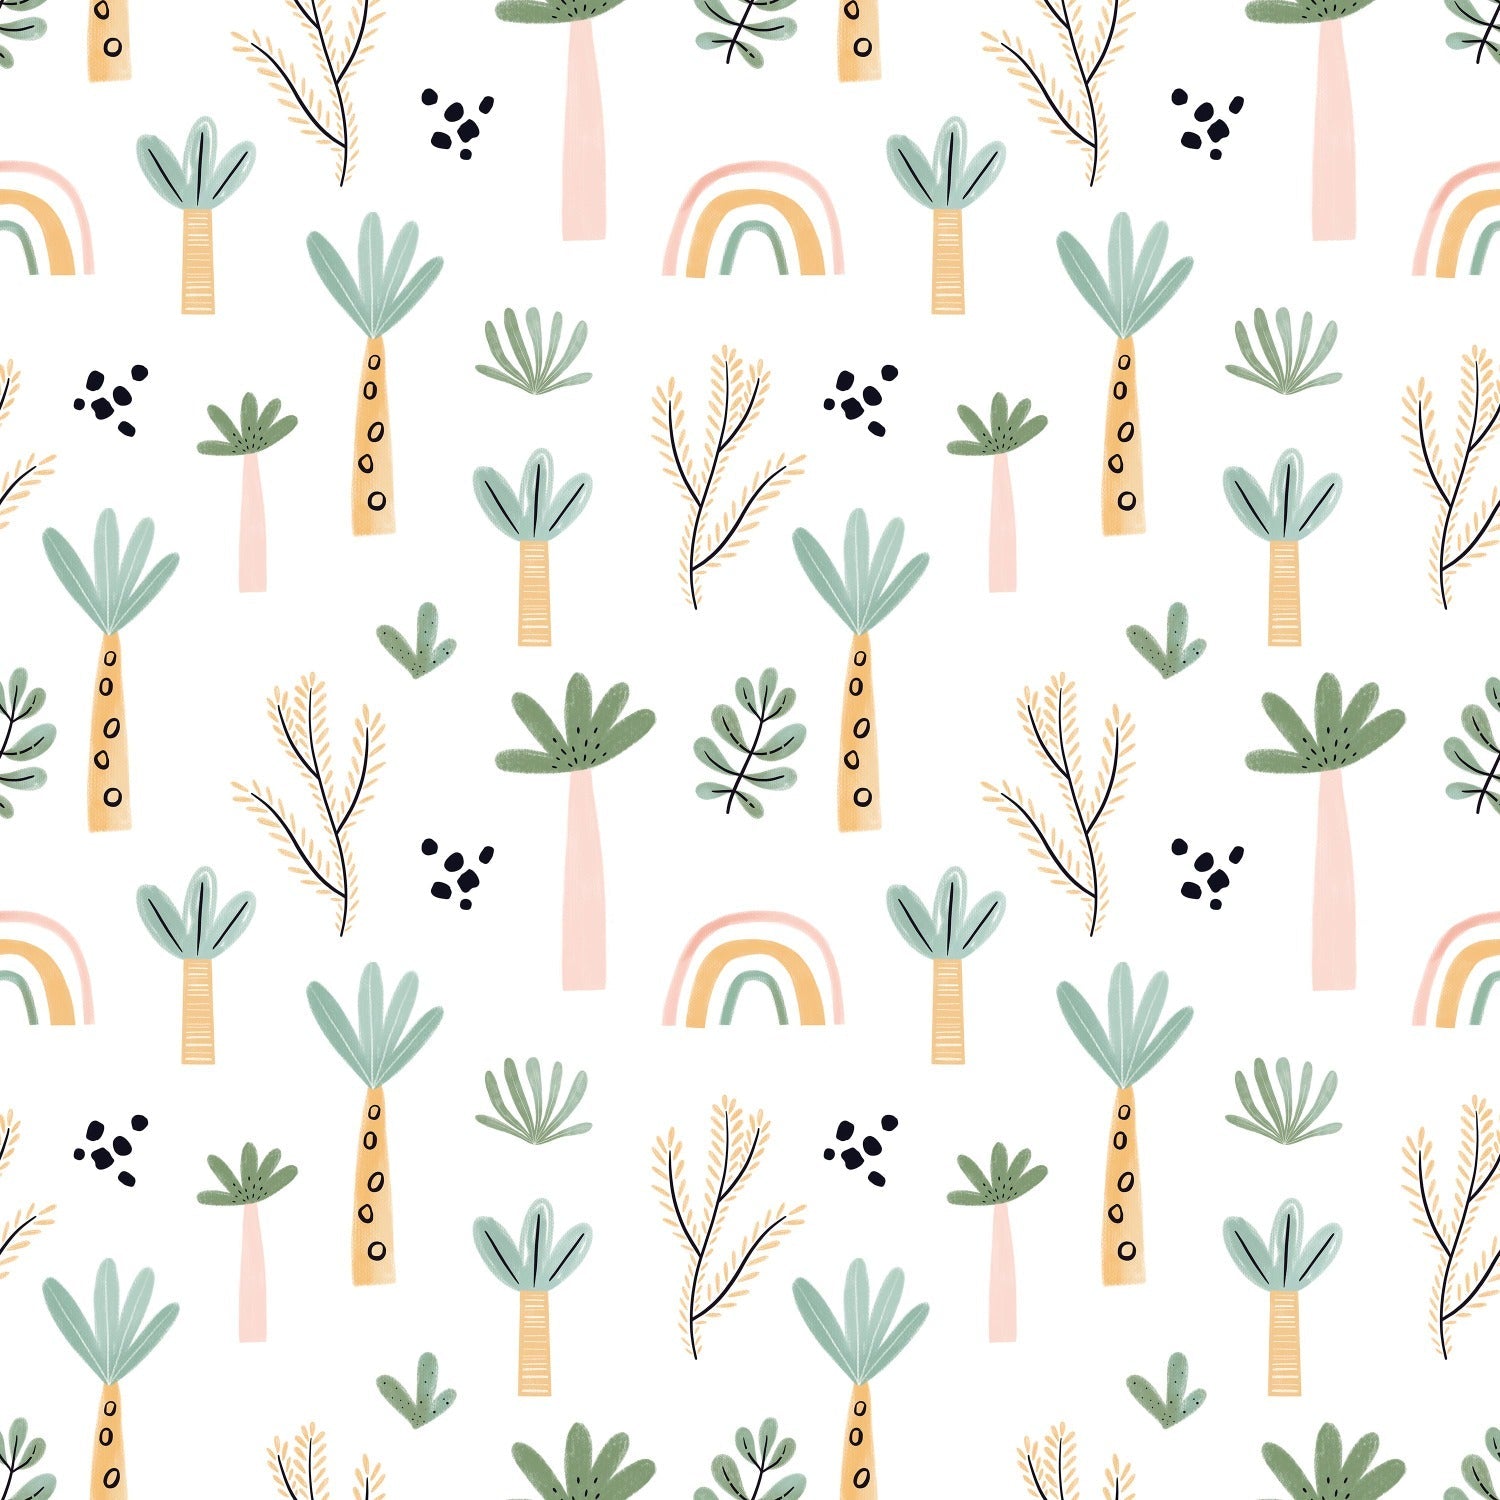 A vibrant and playful wallpaper pattern featuring a mix of tropical elements and whimsical designs, including green palm trees, soft pink rainbows, and abstract black spots. The design is set against a light cream background, creating a cheerful and inviting atmosphere perfect for a child's room.